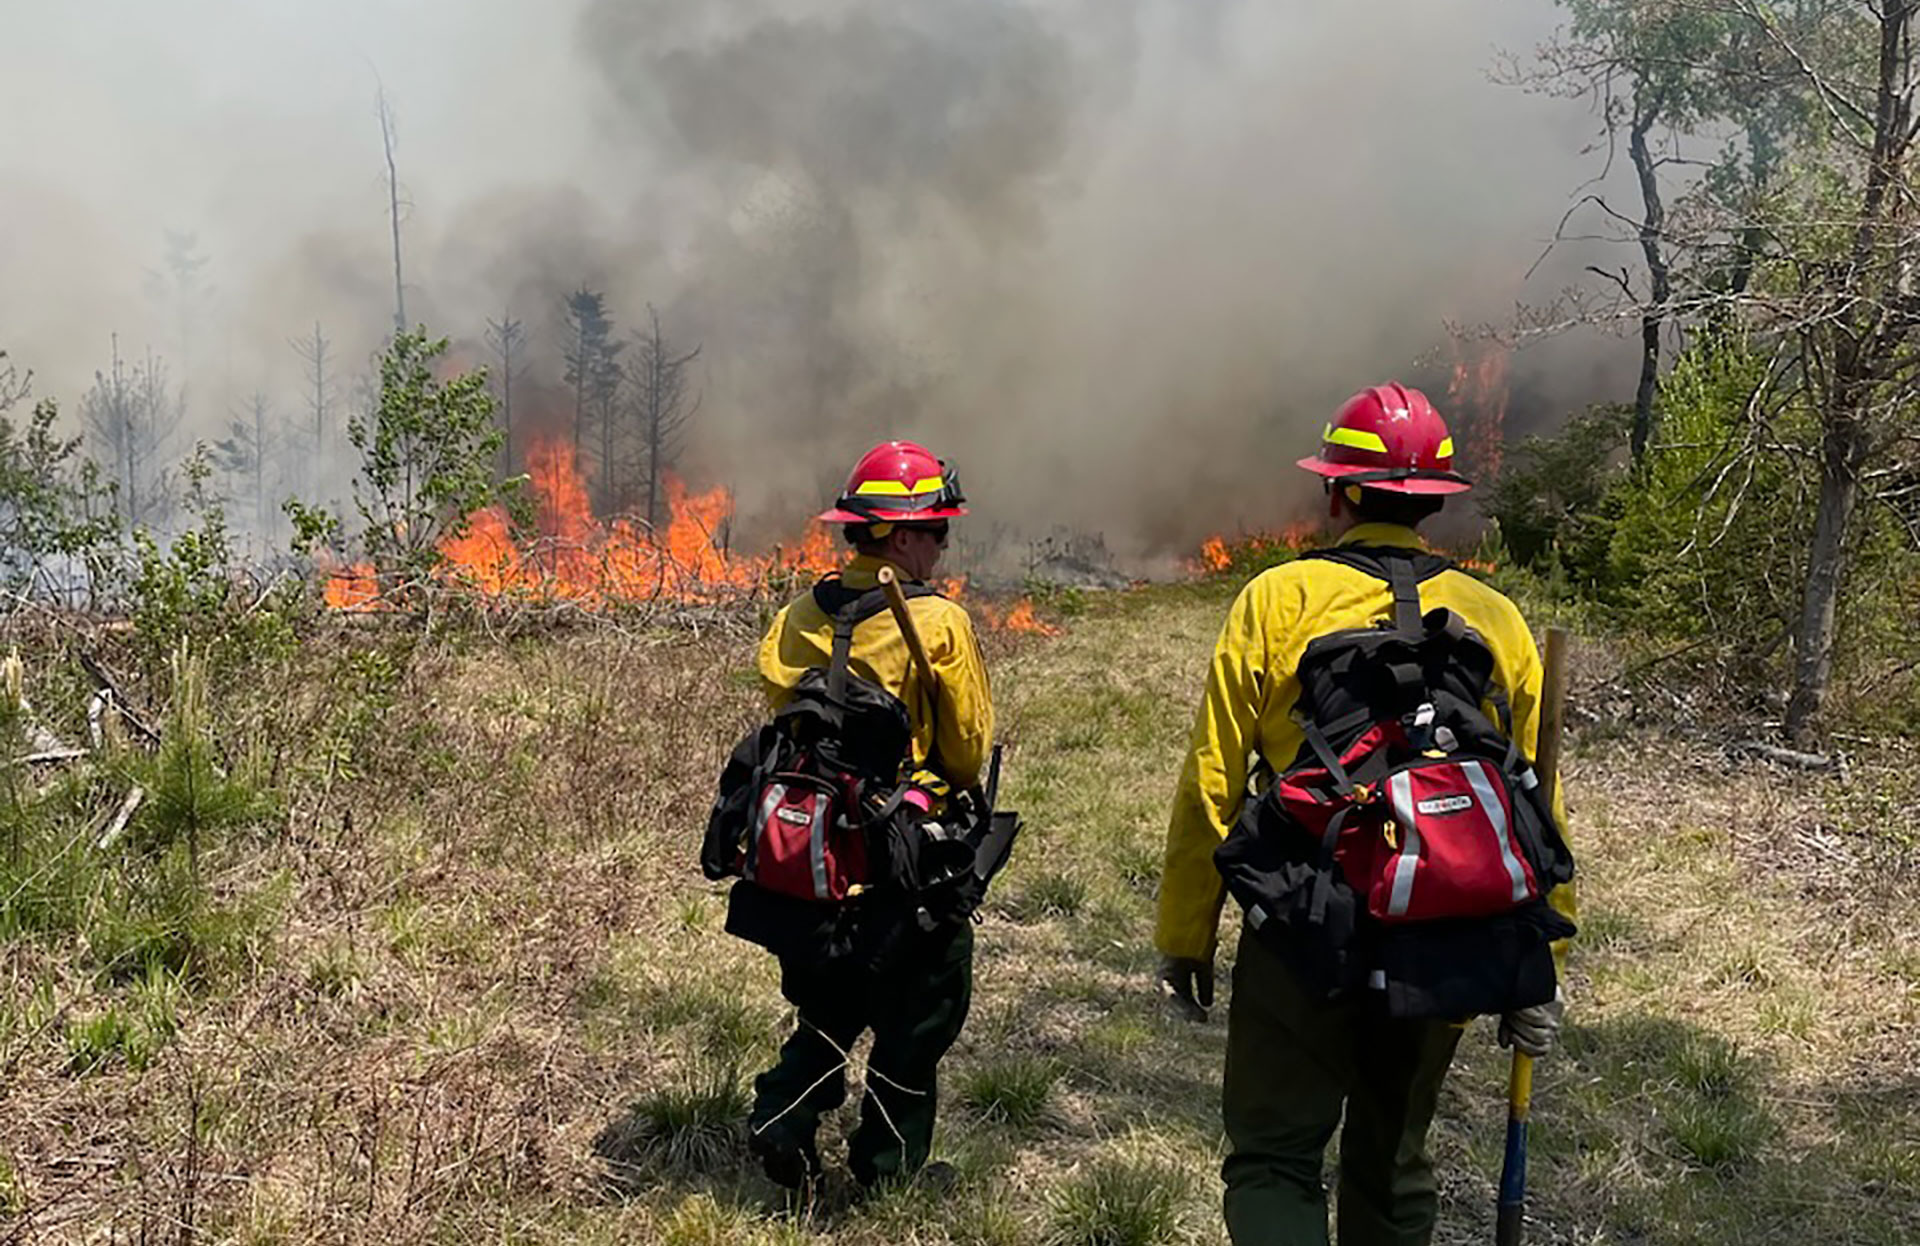 Forest Ranger Chris Pelrah shares his experience fightinf wildfires in Canada